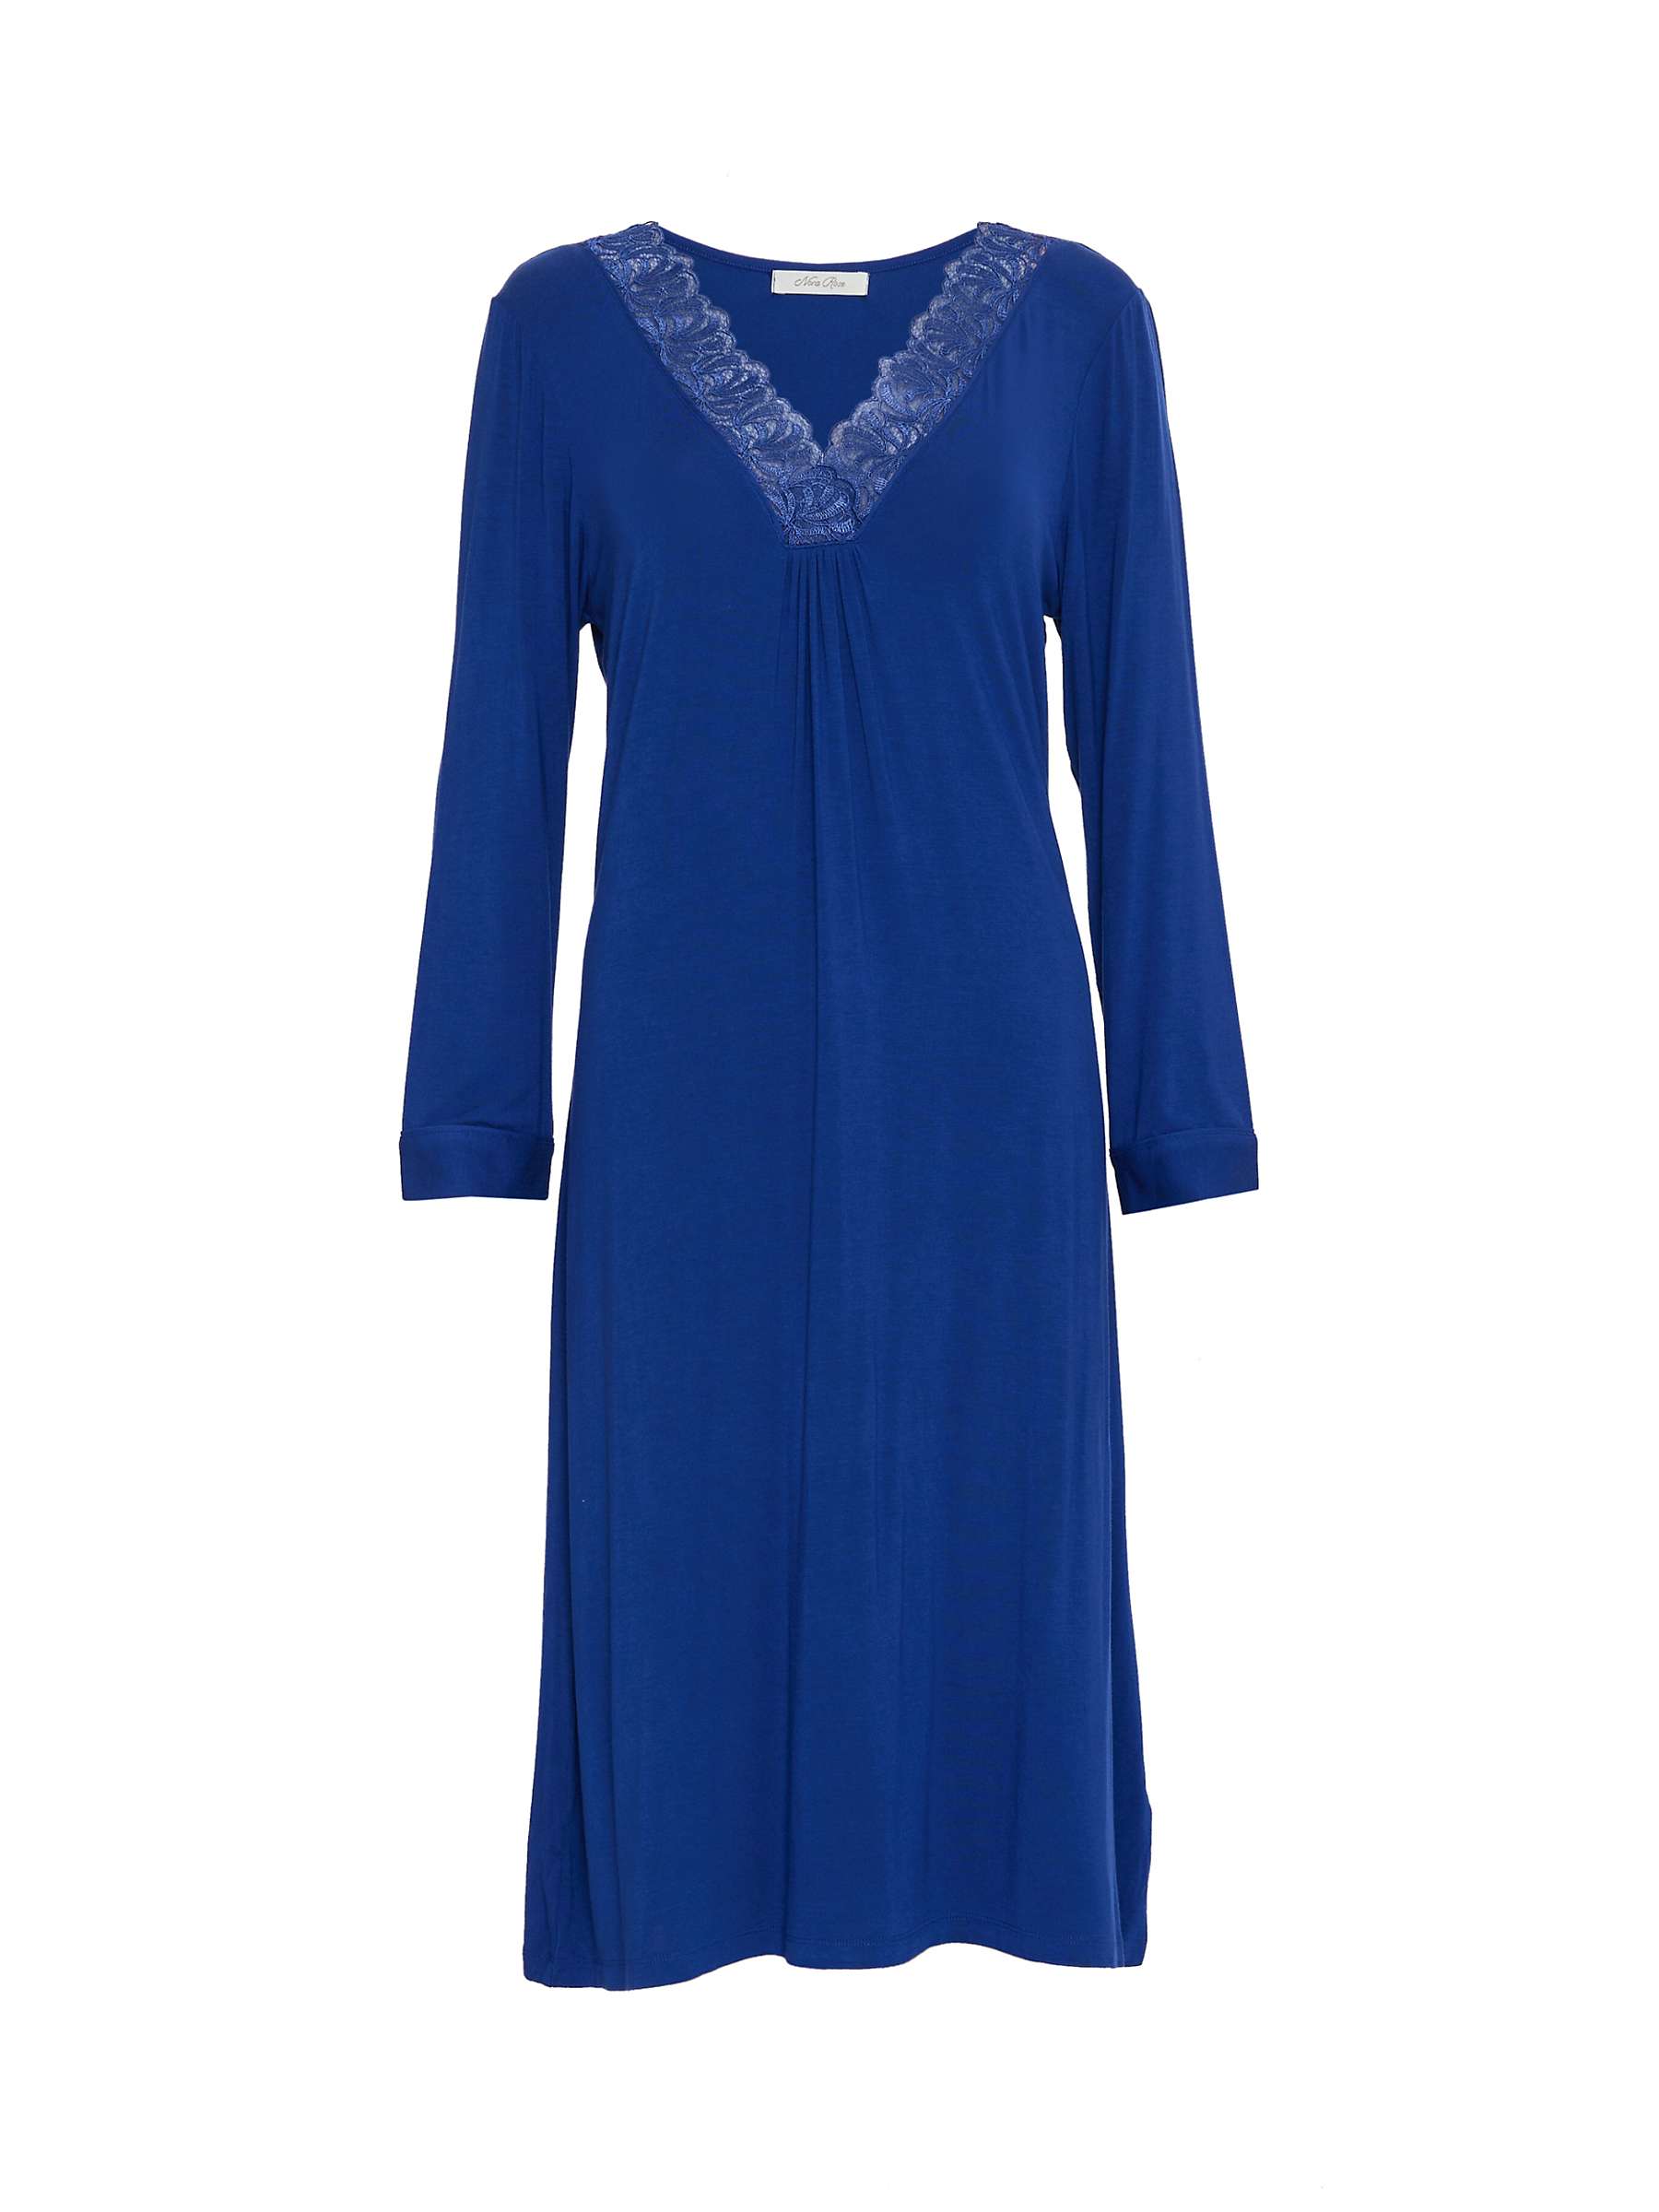 Buy Nora Rose by Cyberjammies Ceclia Jersey Lace Nightdress, Navy Online at johnlewis.com